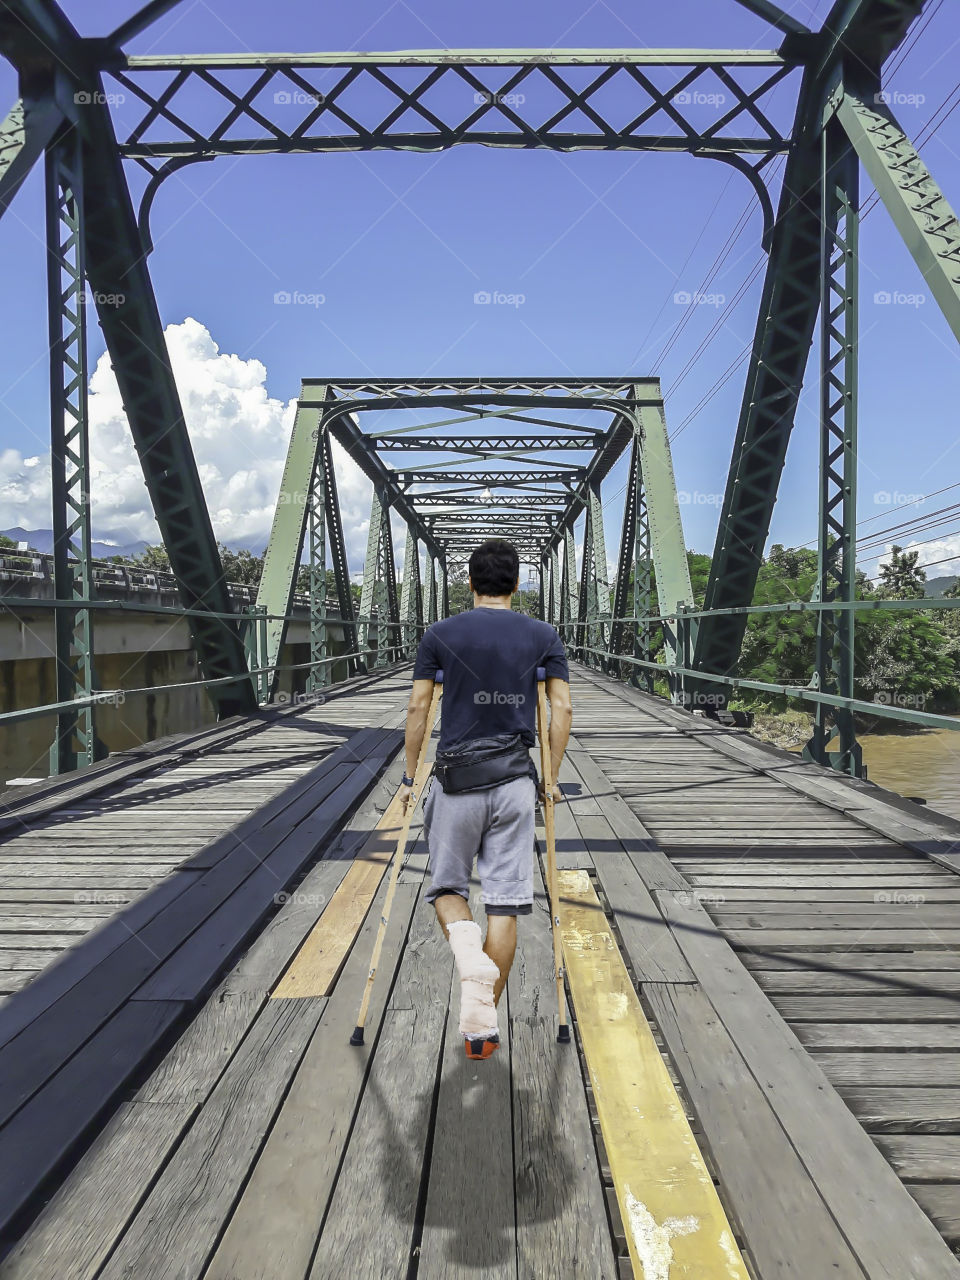 Asian man used crutches walks on The wooden bridge steel structure across the Pai River, Phitsanulok in Thailand.